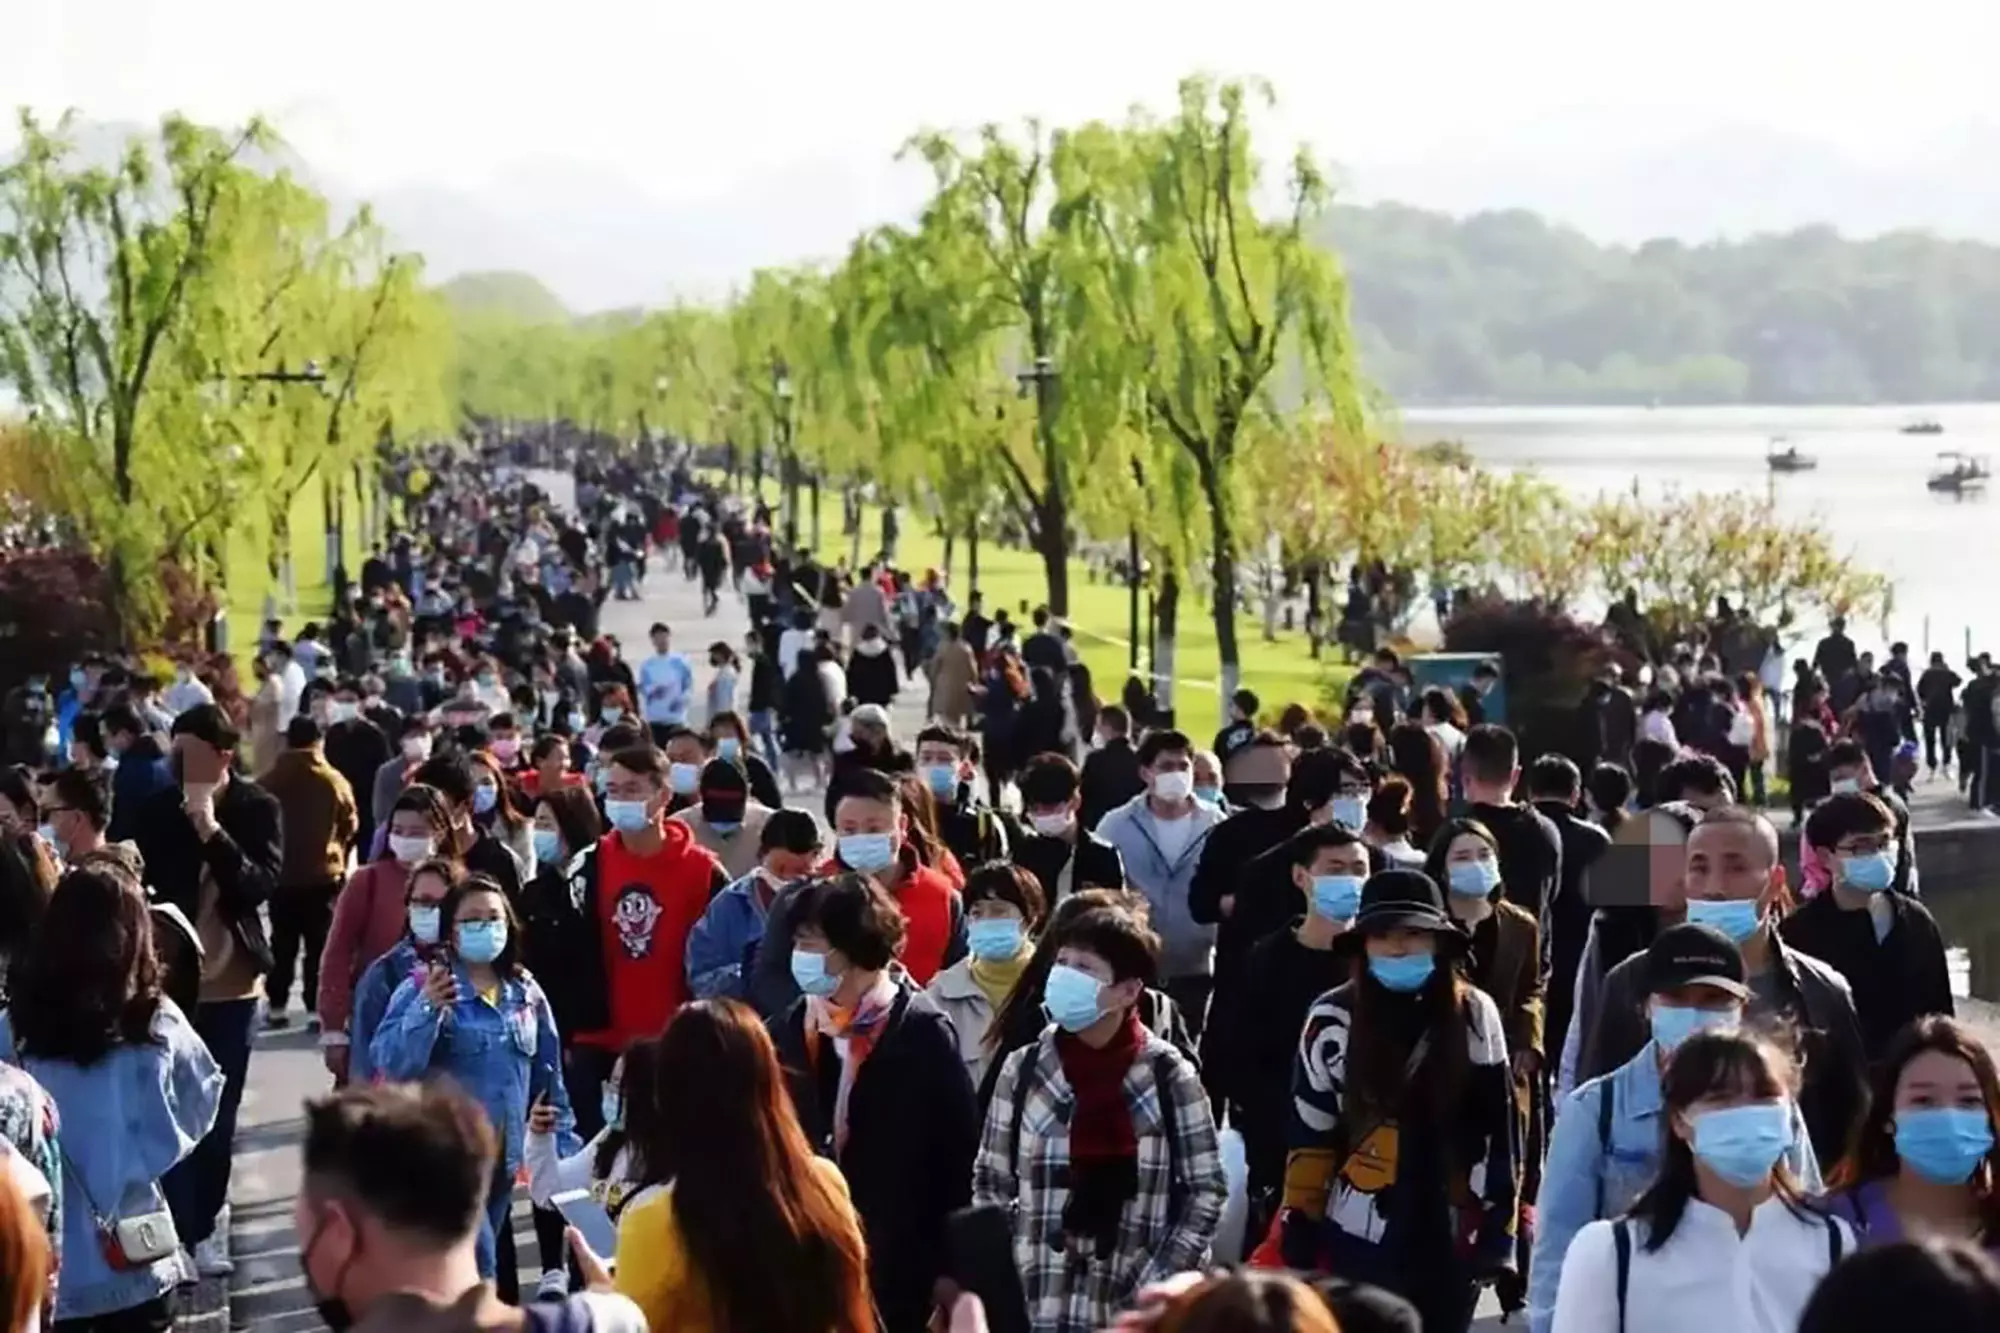 More than 60,000 tourists visited West Lake on Sunday (5 April).